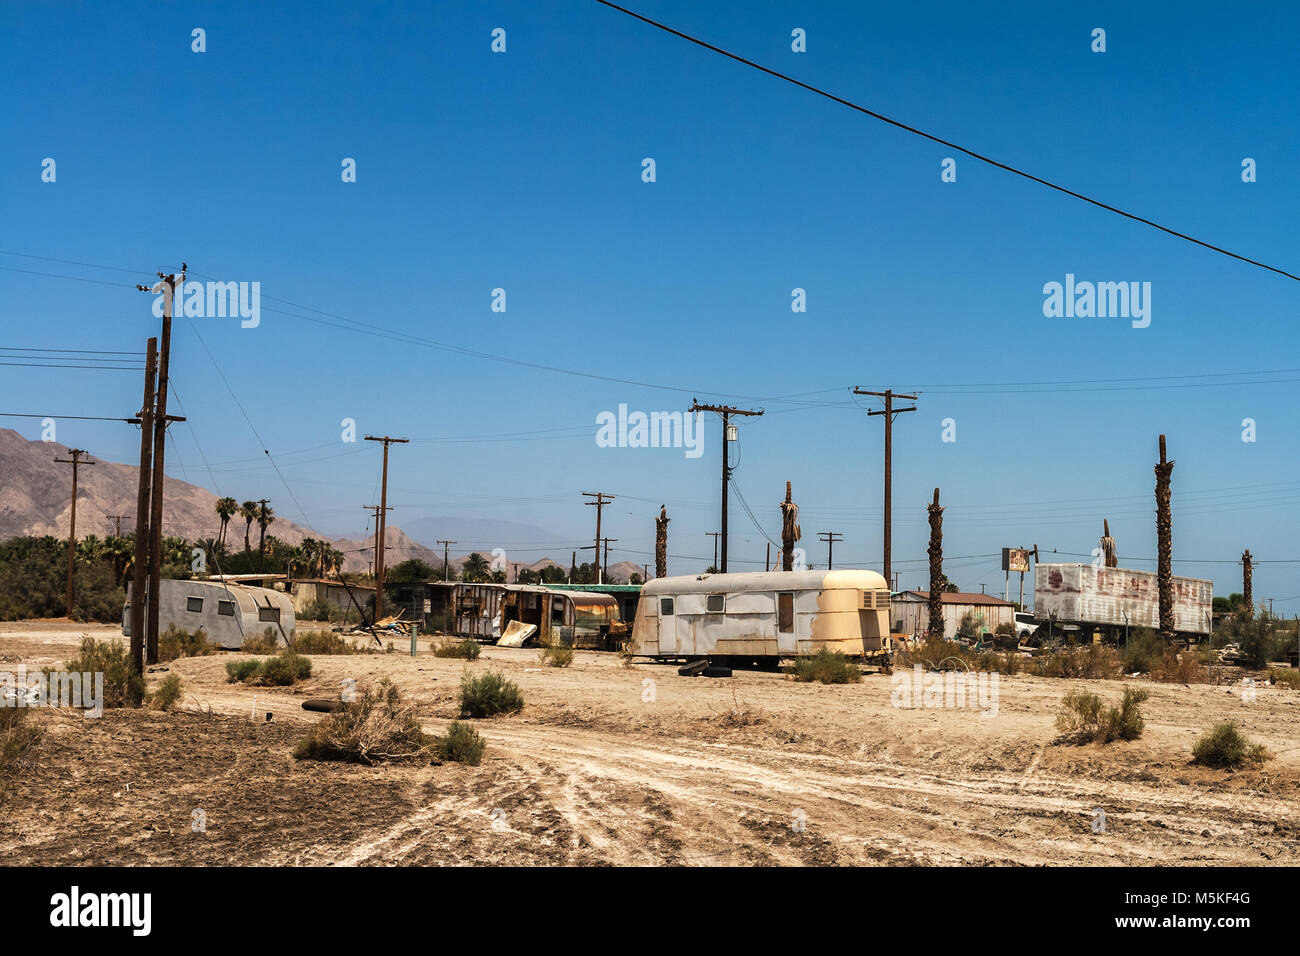 Torn and abandoned trailers and vehicles in Salton Sea, California Stock Photo